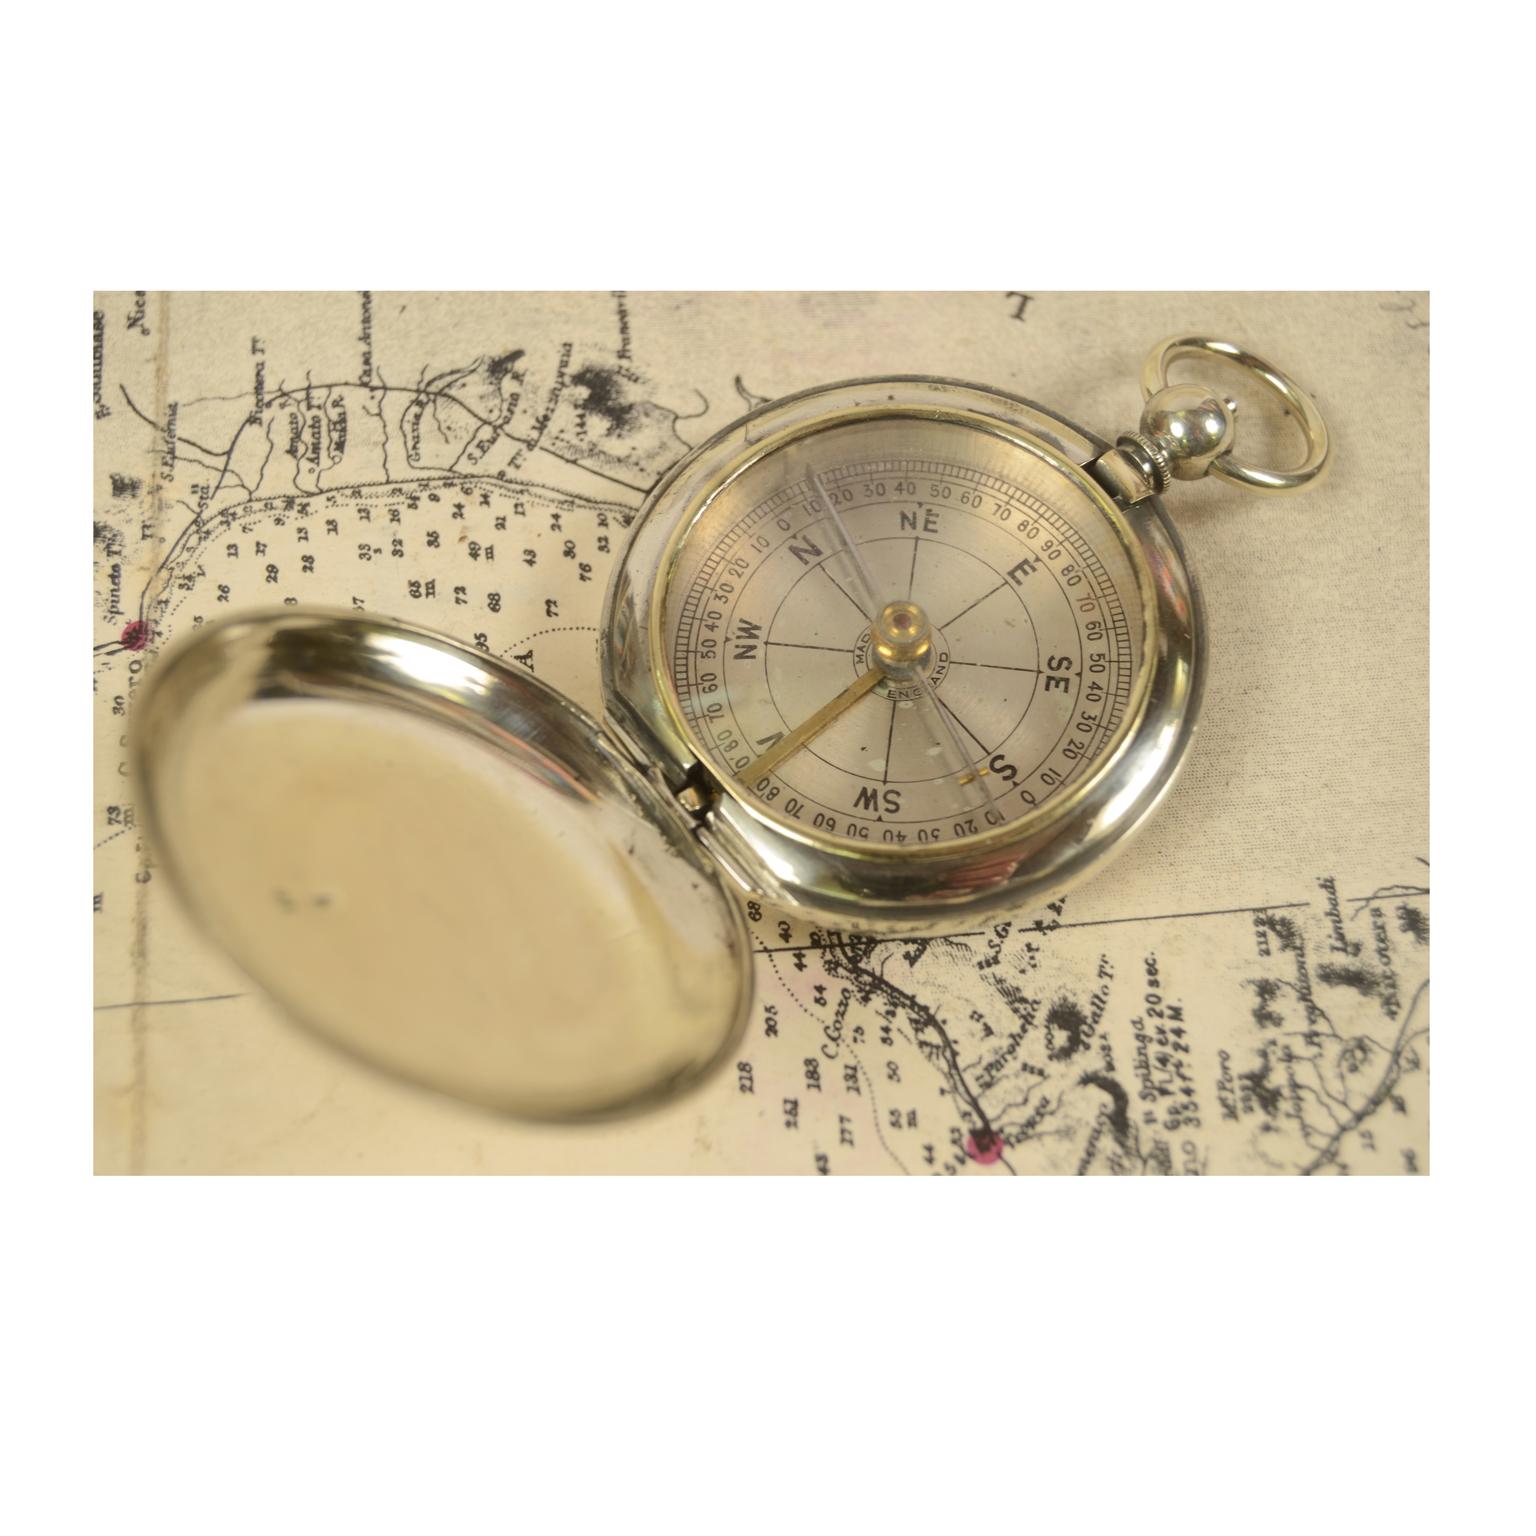 British Pocket Compass for an Officer English Manufacture, Early 1900s